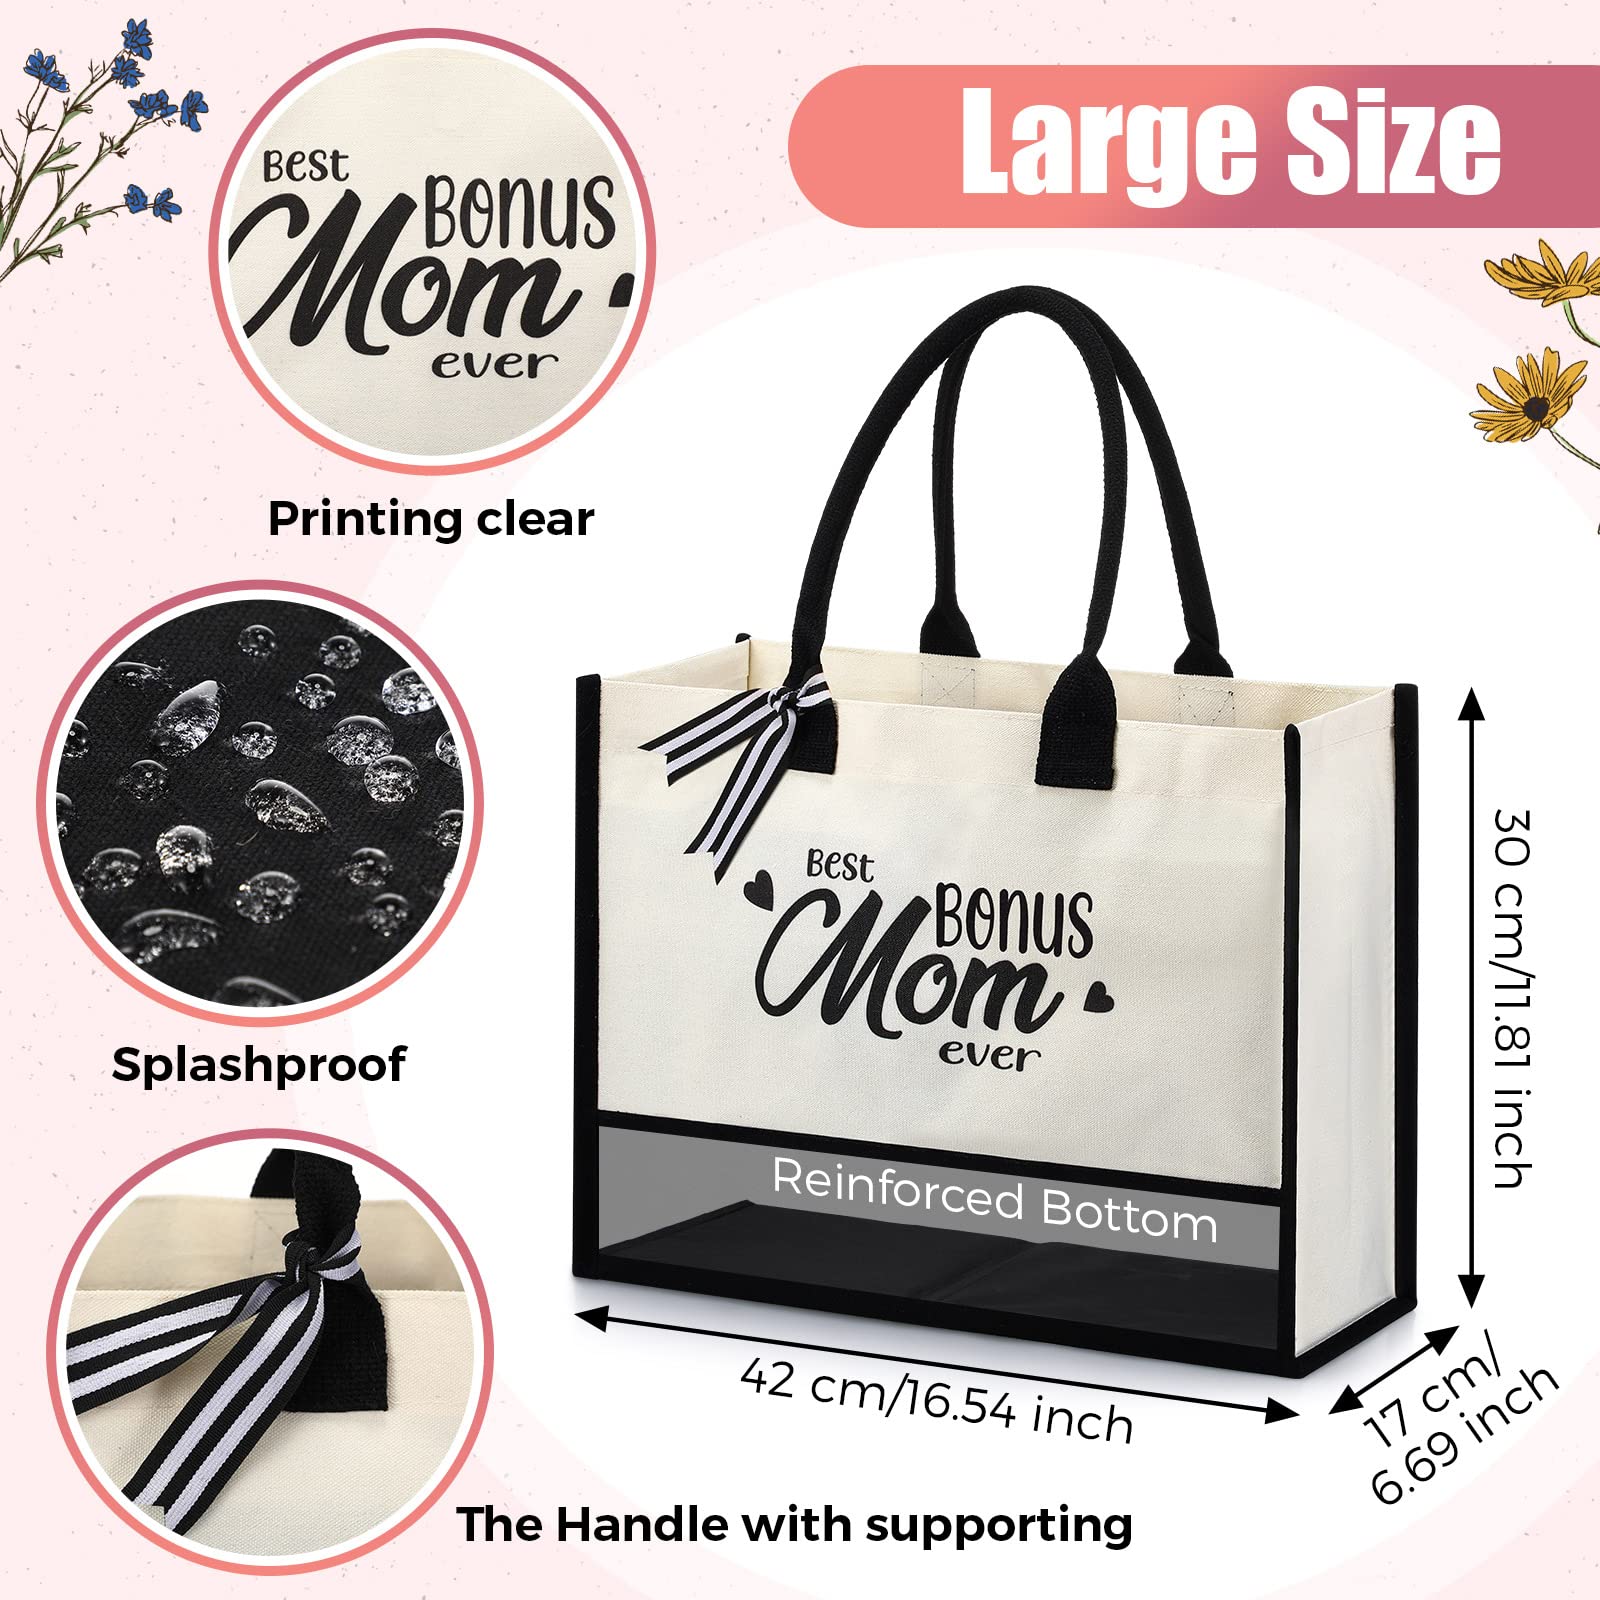 Best Bonus Mom Ever Appreciation Gifts Canvas Tote Bag Women Mother's Day Gift for Stepmom with Zipper Kitchen Reusable Grocery Bags Birthday Thank You Gift from Daughter Son Black and White